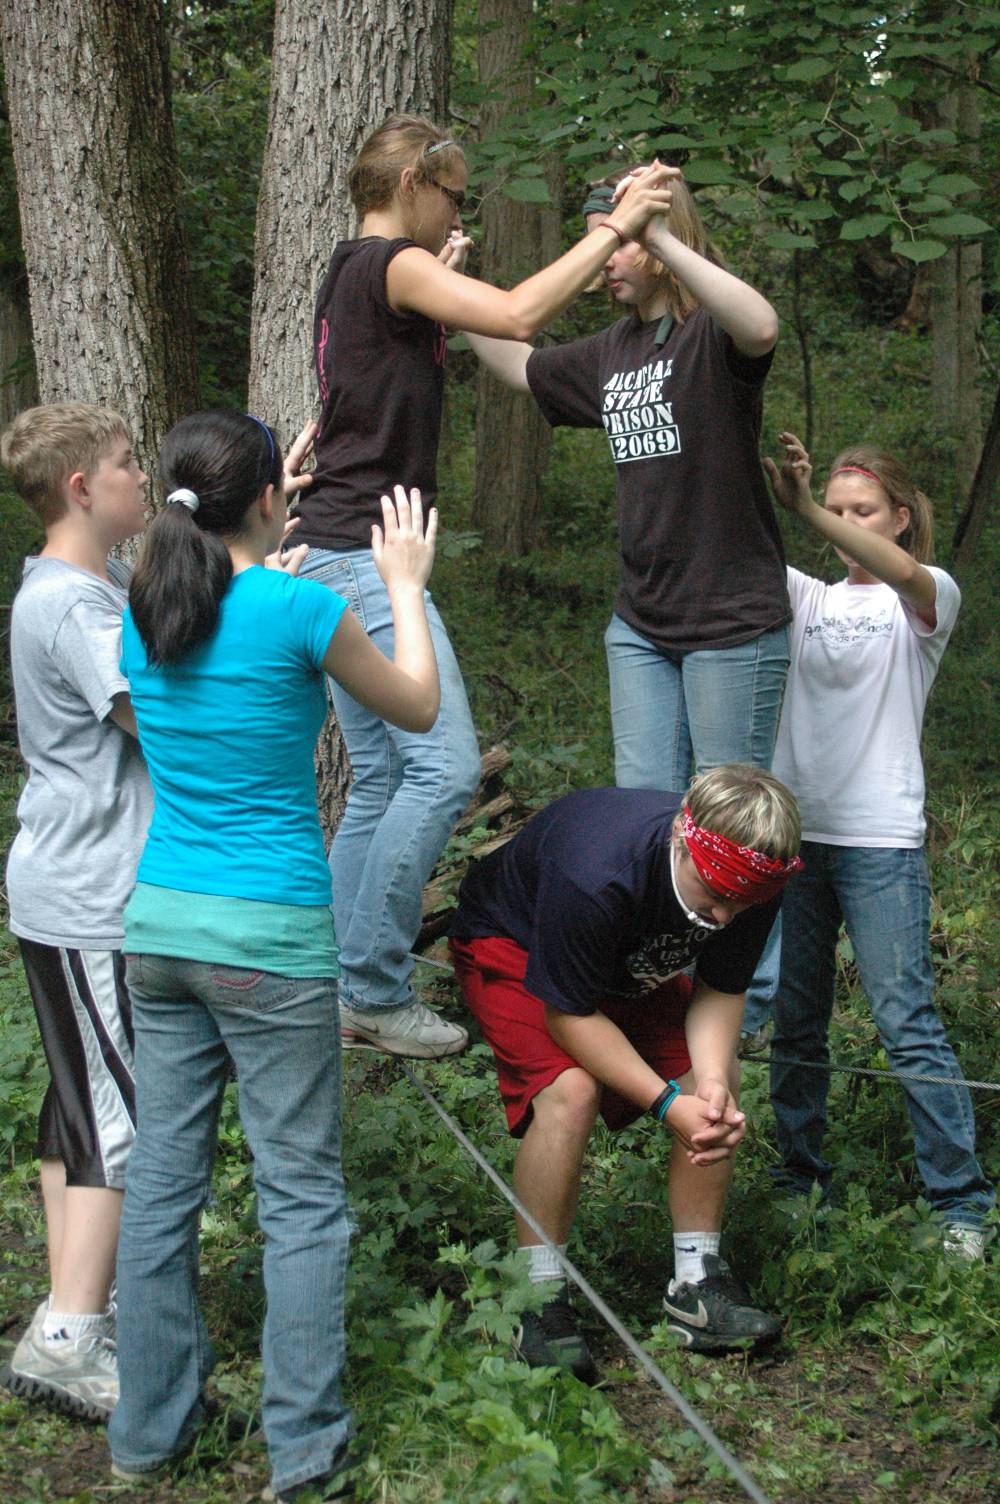 TOP IOWA ART CAMP: Pilgrim Heights Camp & Retreat Center is a Top Art Summer Camp located in Montour Iowa offering many fun and enriching Art and other camp programs. Pilgrim Heights Camp & Retreat Center also offers CIT/LIT and/or Teen Leadership Opportunities, too.